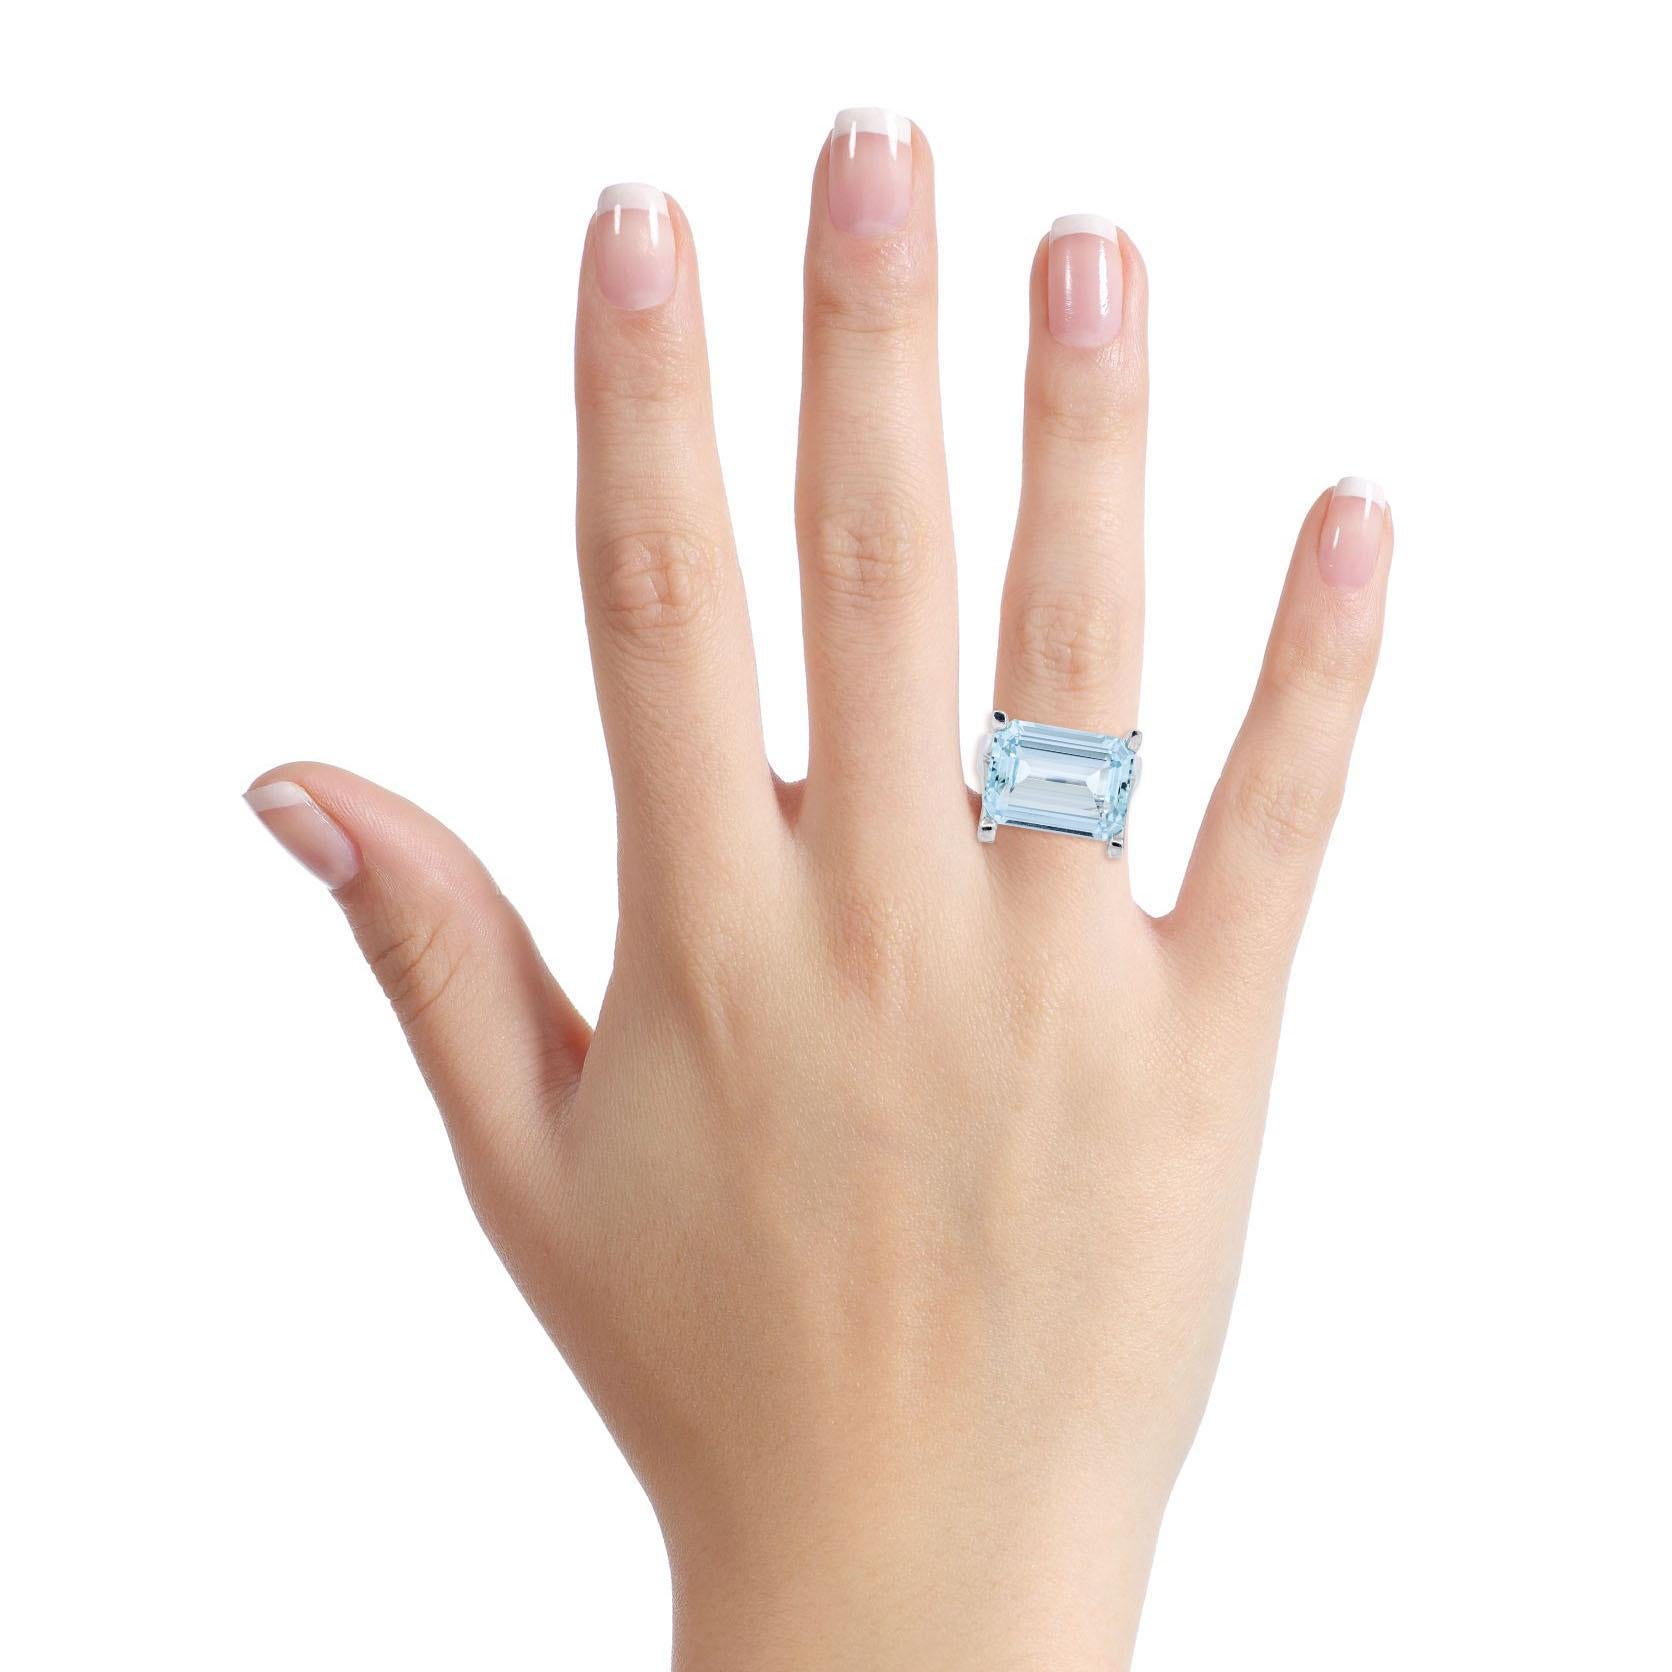 Aquamarine solitaire ring in 14-karat white gold. Polish metal setting prong set with a single emerald cut natural aquamarine. 

Size, 6.5
Height, 9mm
Width, 15 - 2mm
Depth, 1mm1
Weight, 6.6 grams
Aquamarine Total Carat Weight, 8.50 carats 
